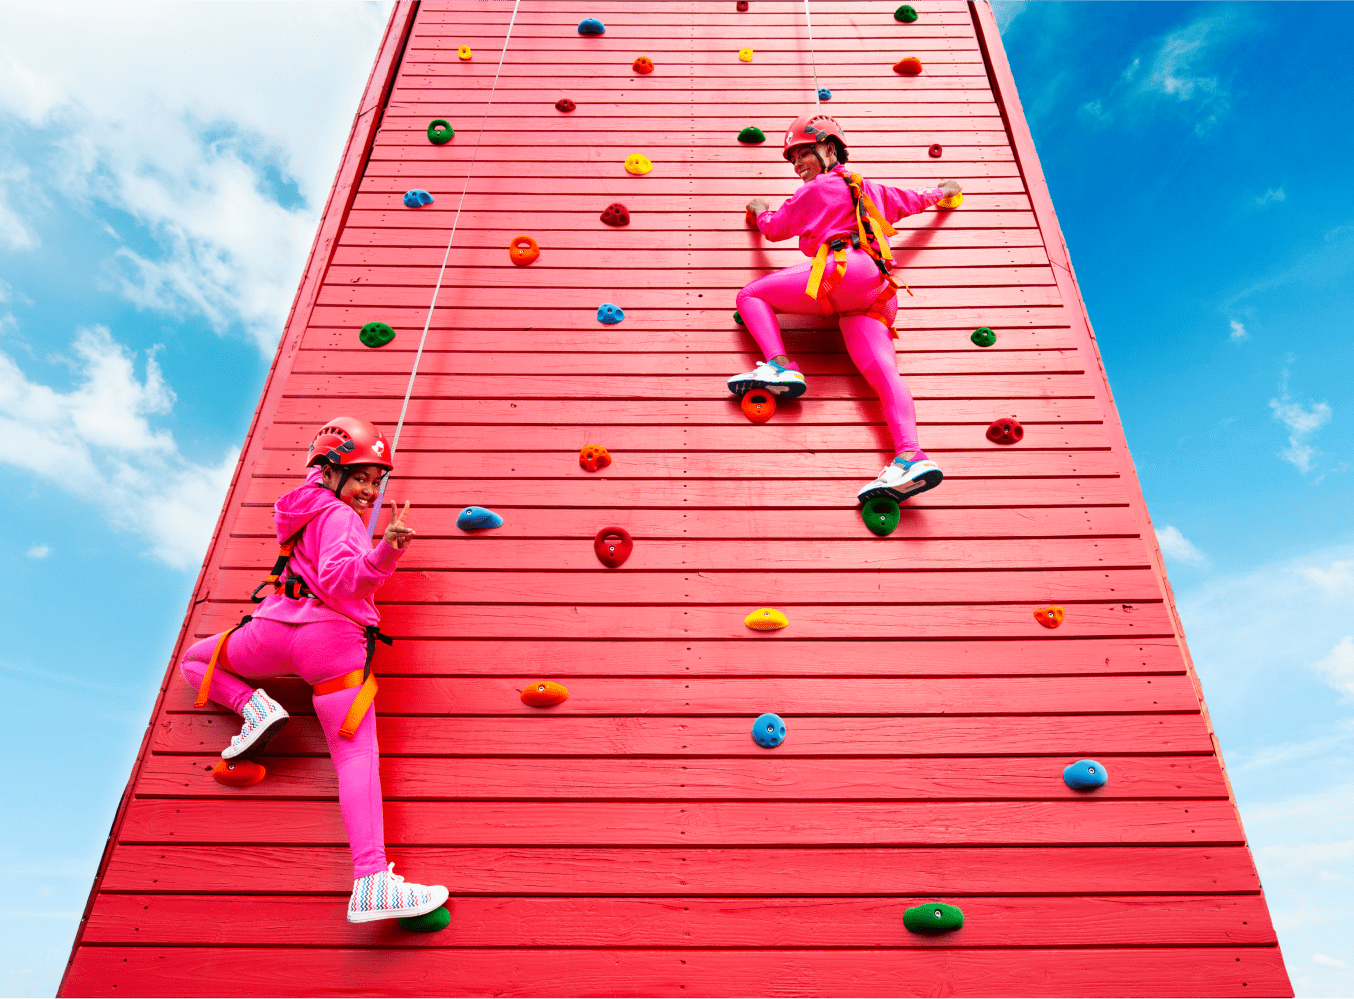 People climbing on a red climbing wall